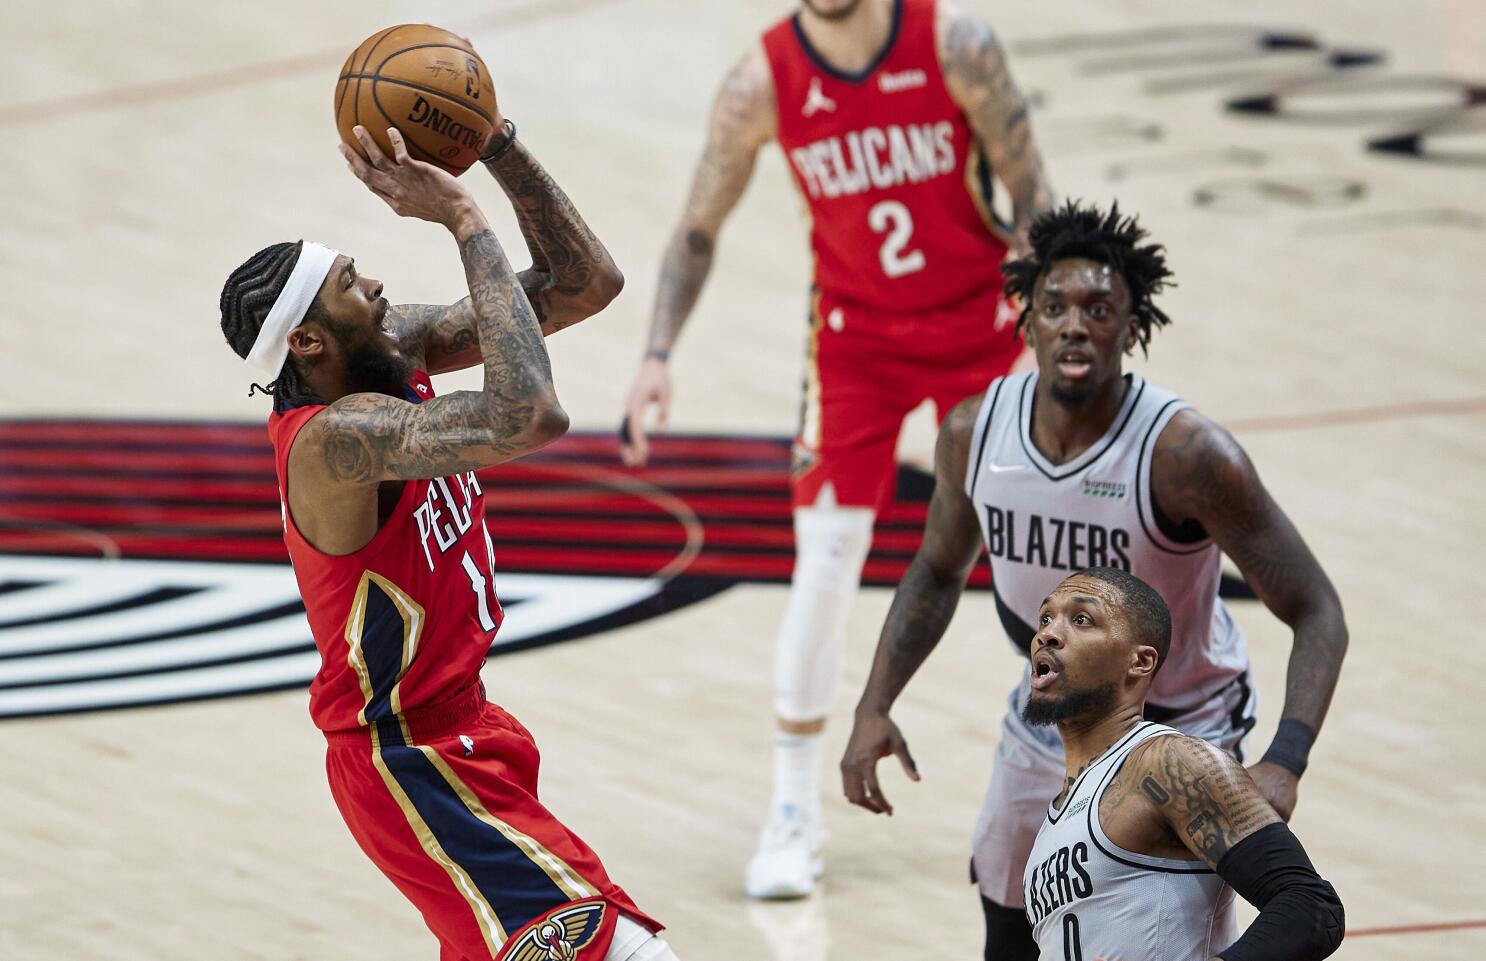 Lillard scores 50 including game-winning free throw as Blazers rally past  Pelicans - The Columbian